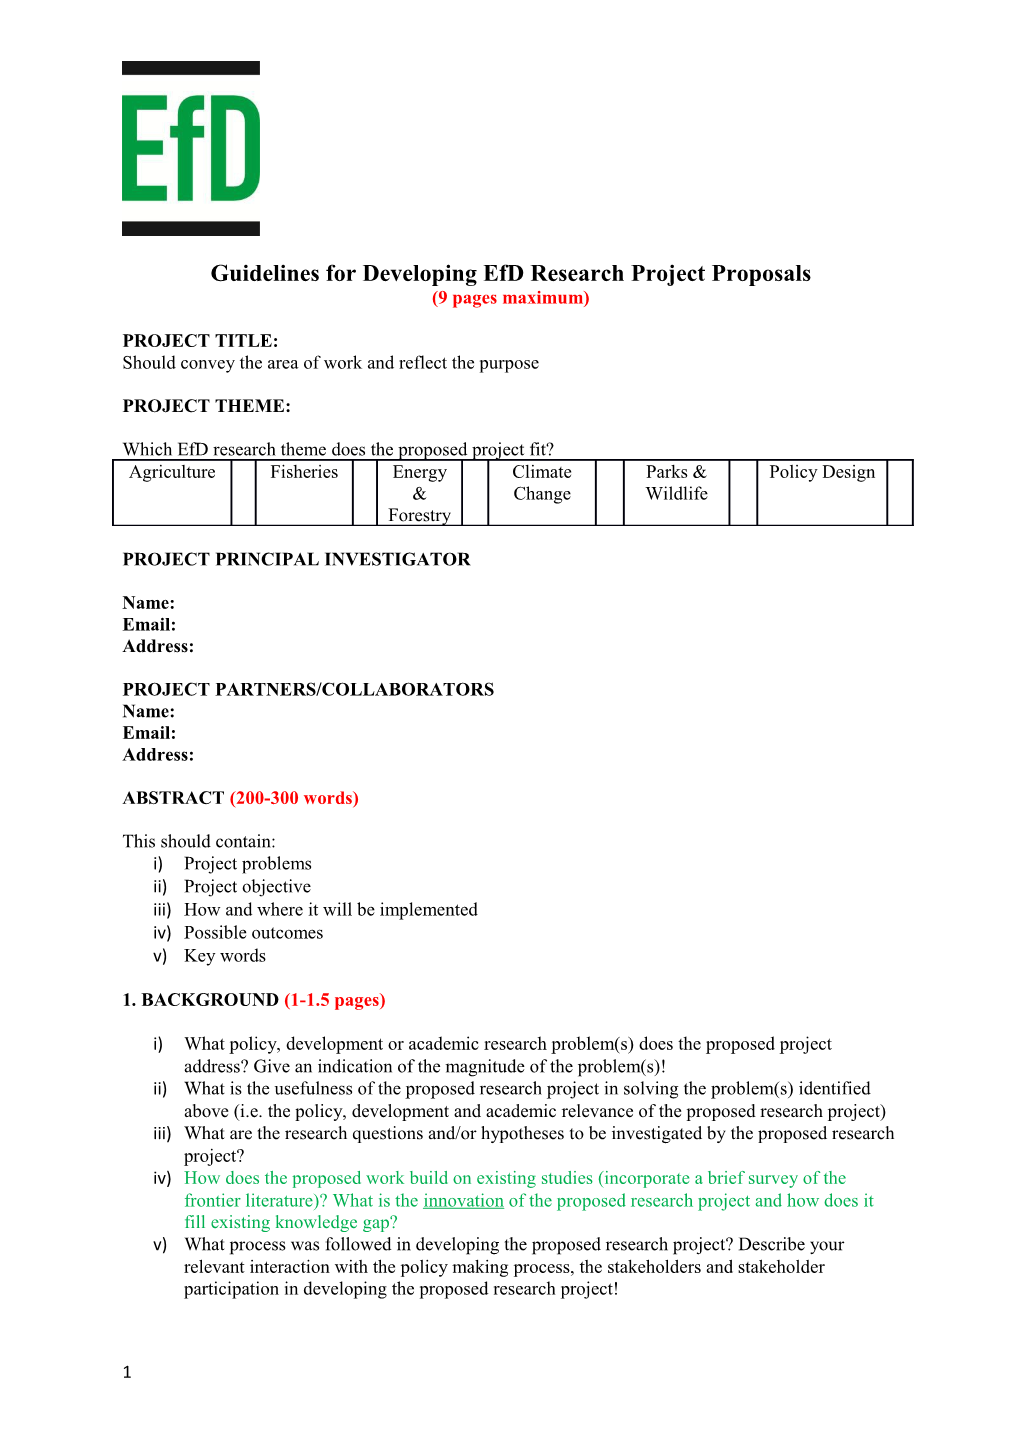 Guidelines for Developing Efd Research Project Proposals